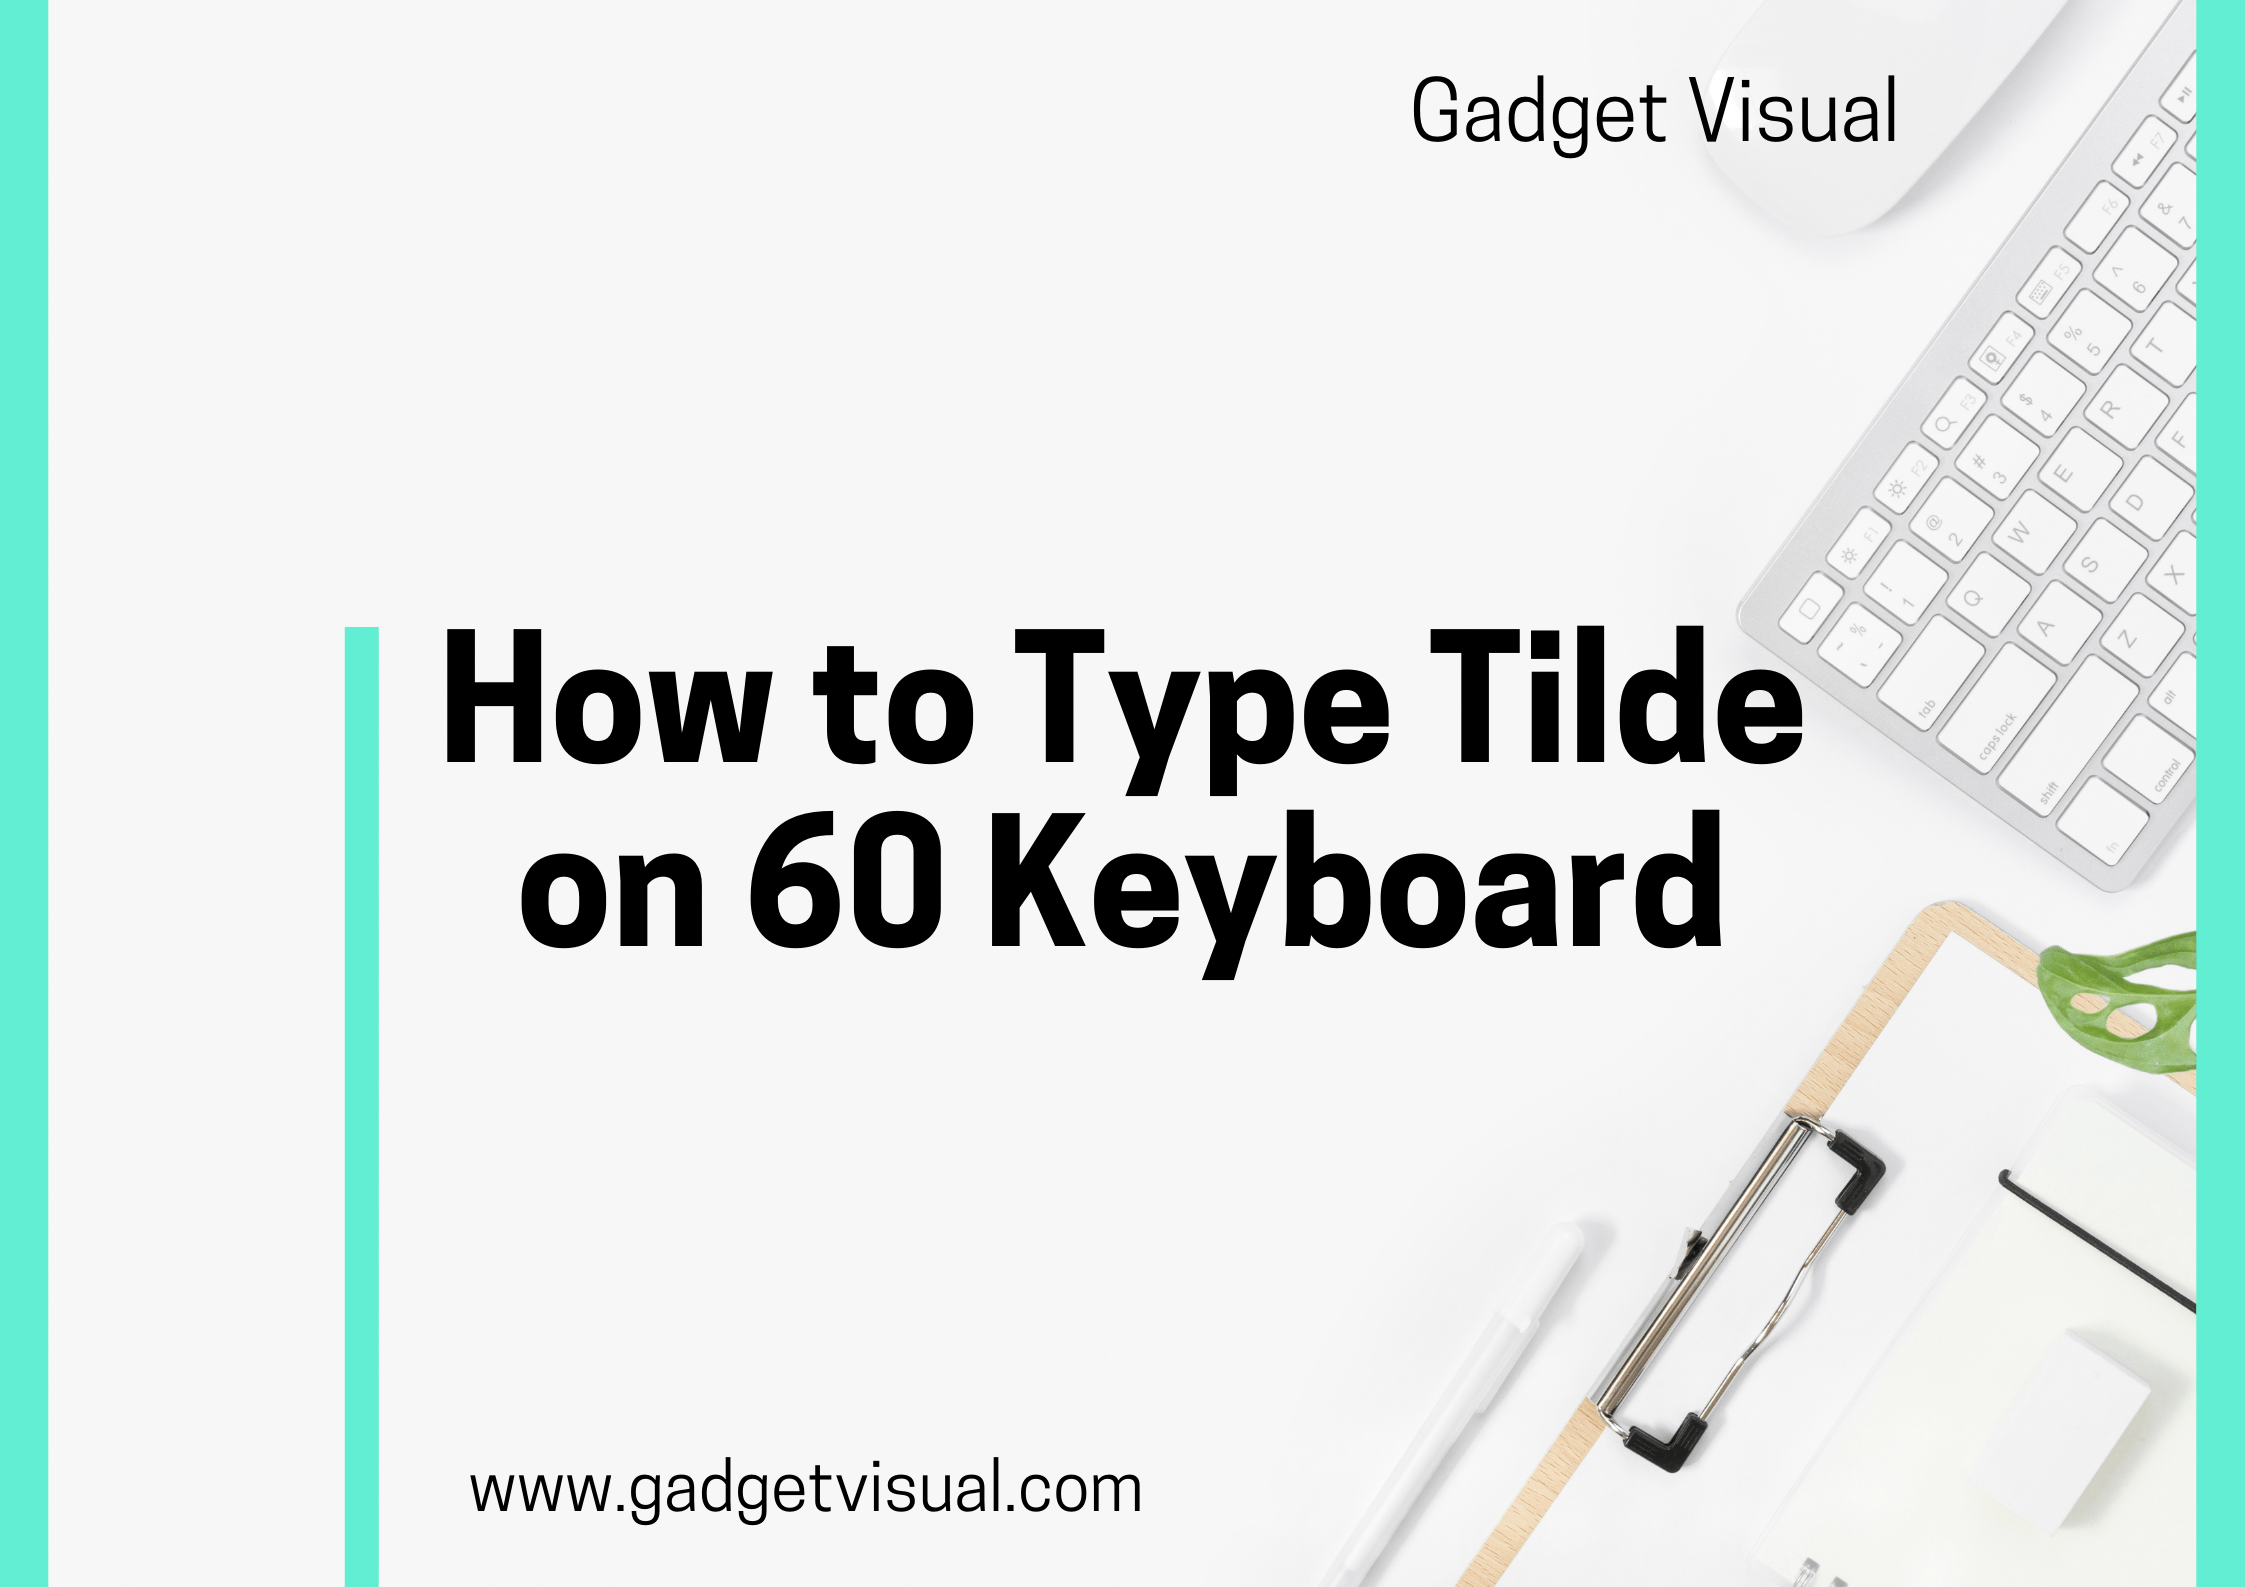 how to type tilde on 60 keyboard